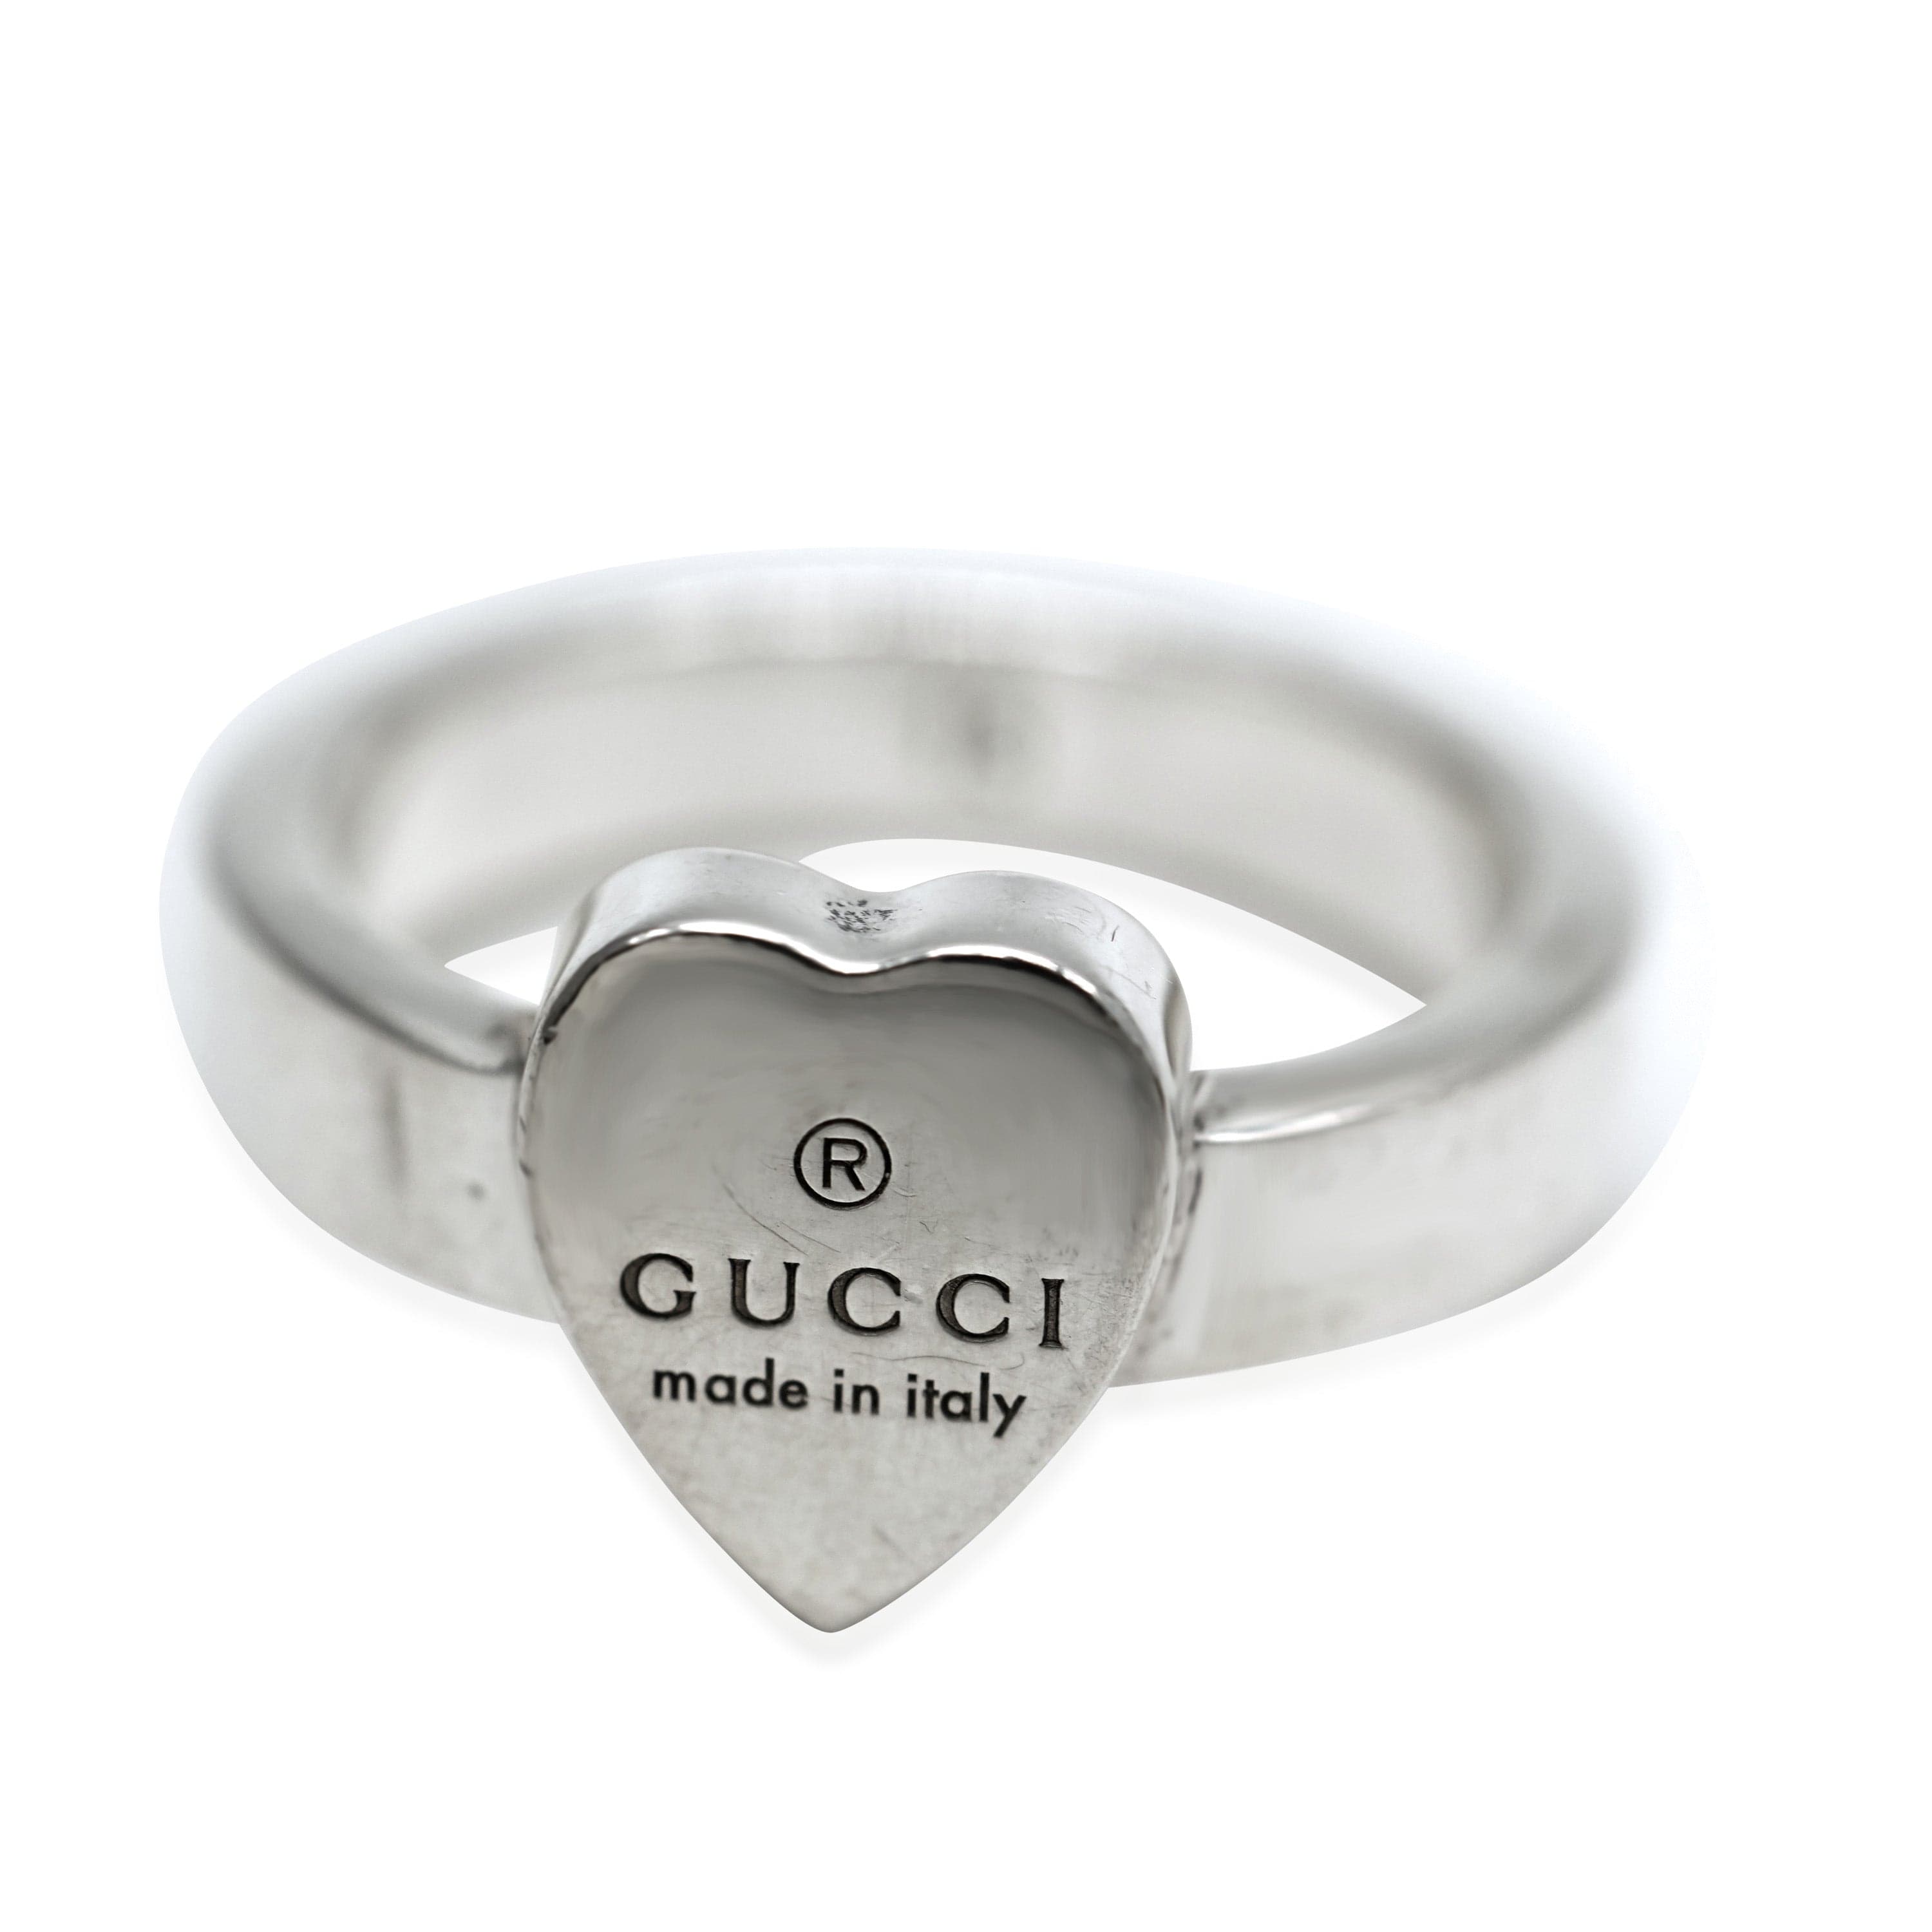 Gucci Gucci Trademark Heart Ring in Sterling Silver